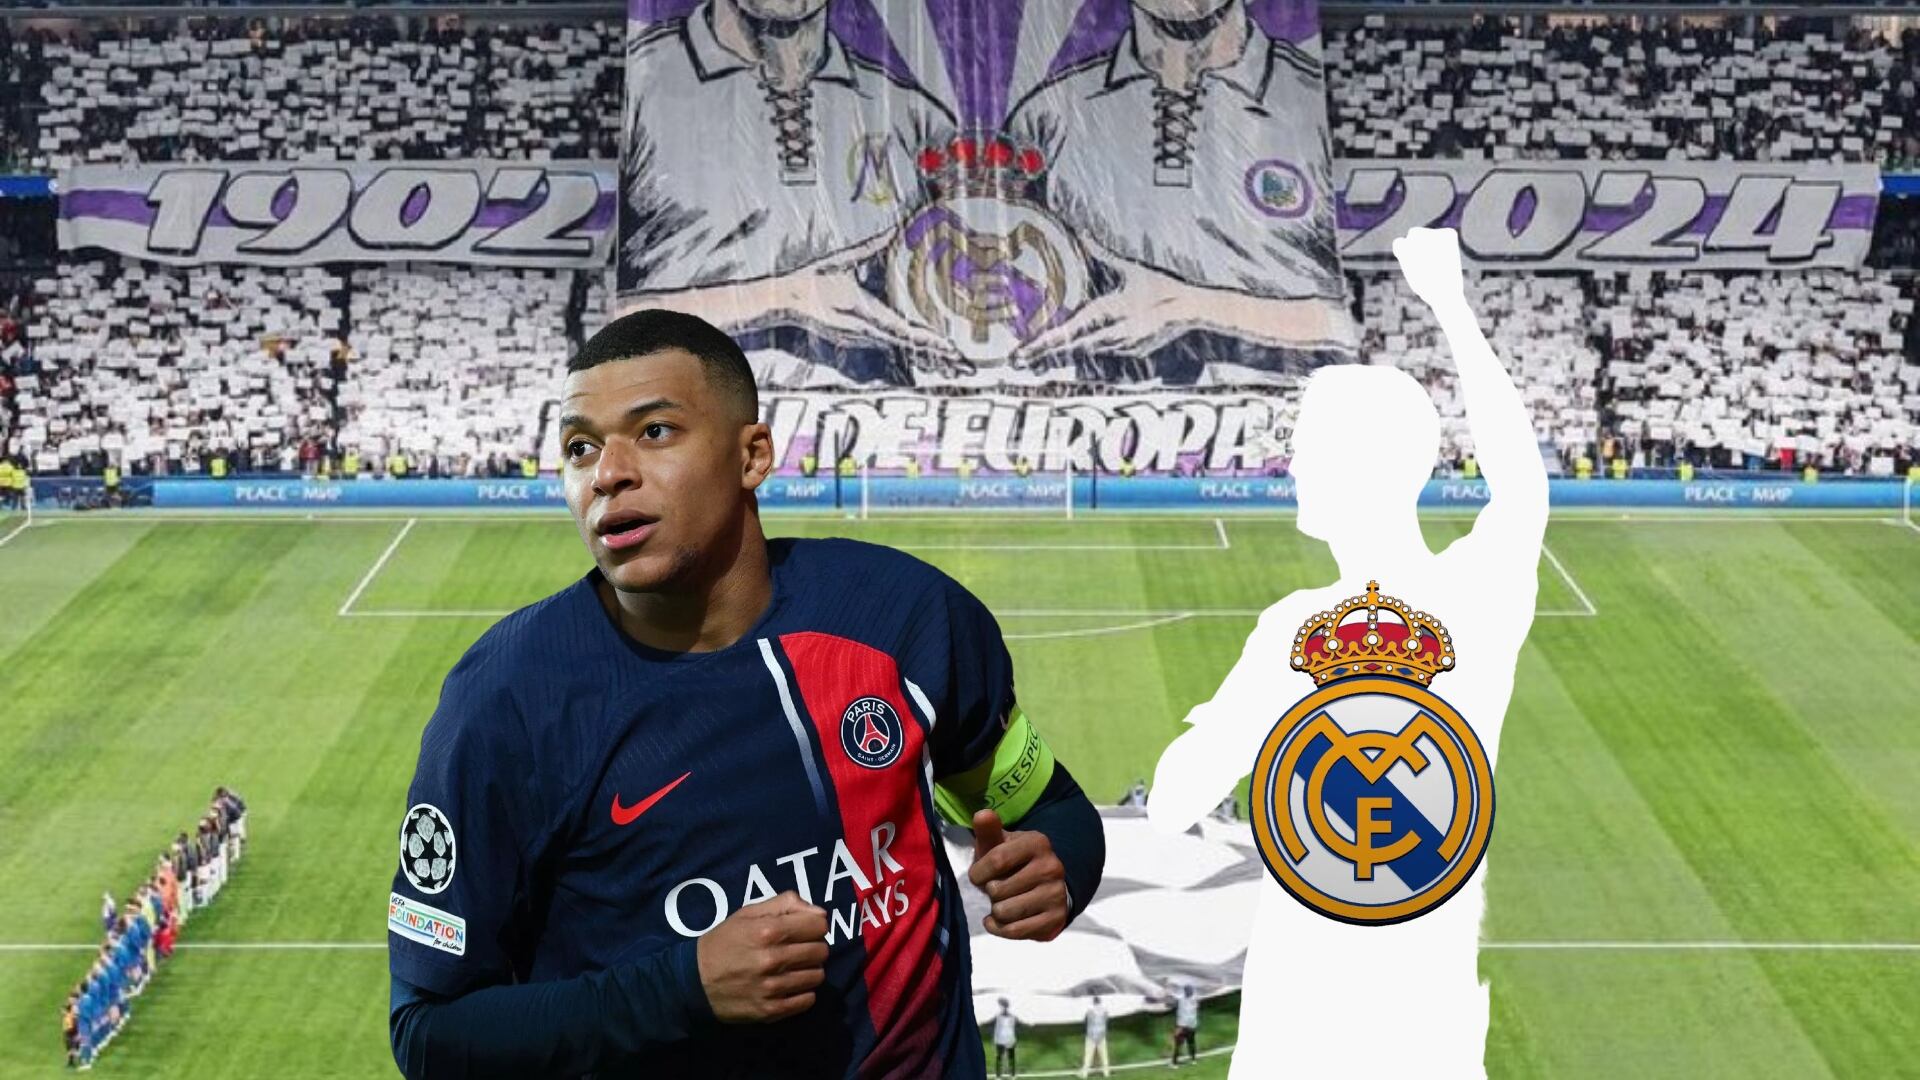 Despite Mbappé arriving to Real Madrid, the player who would stay for only $1.5m after his great performances